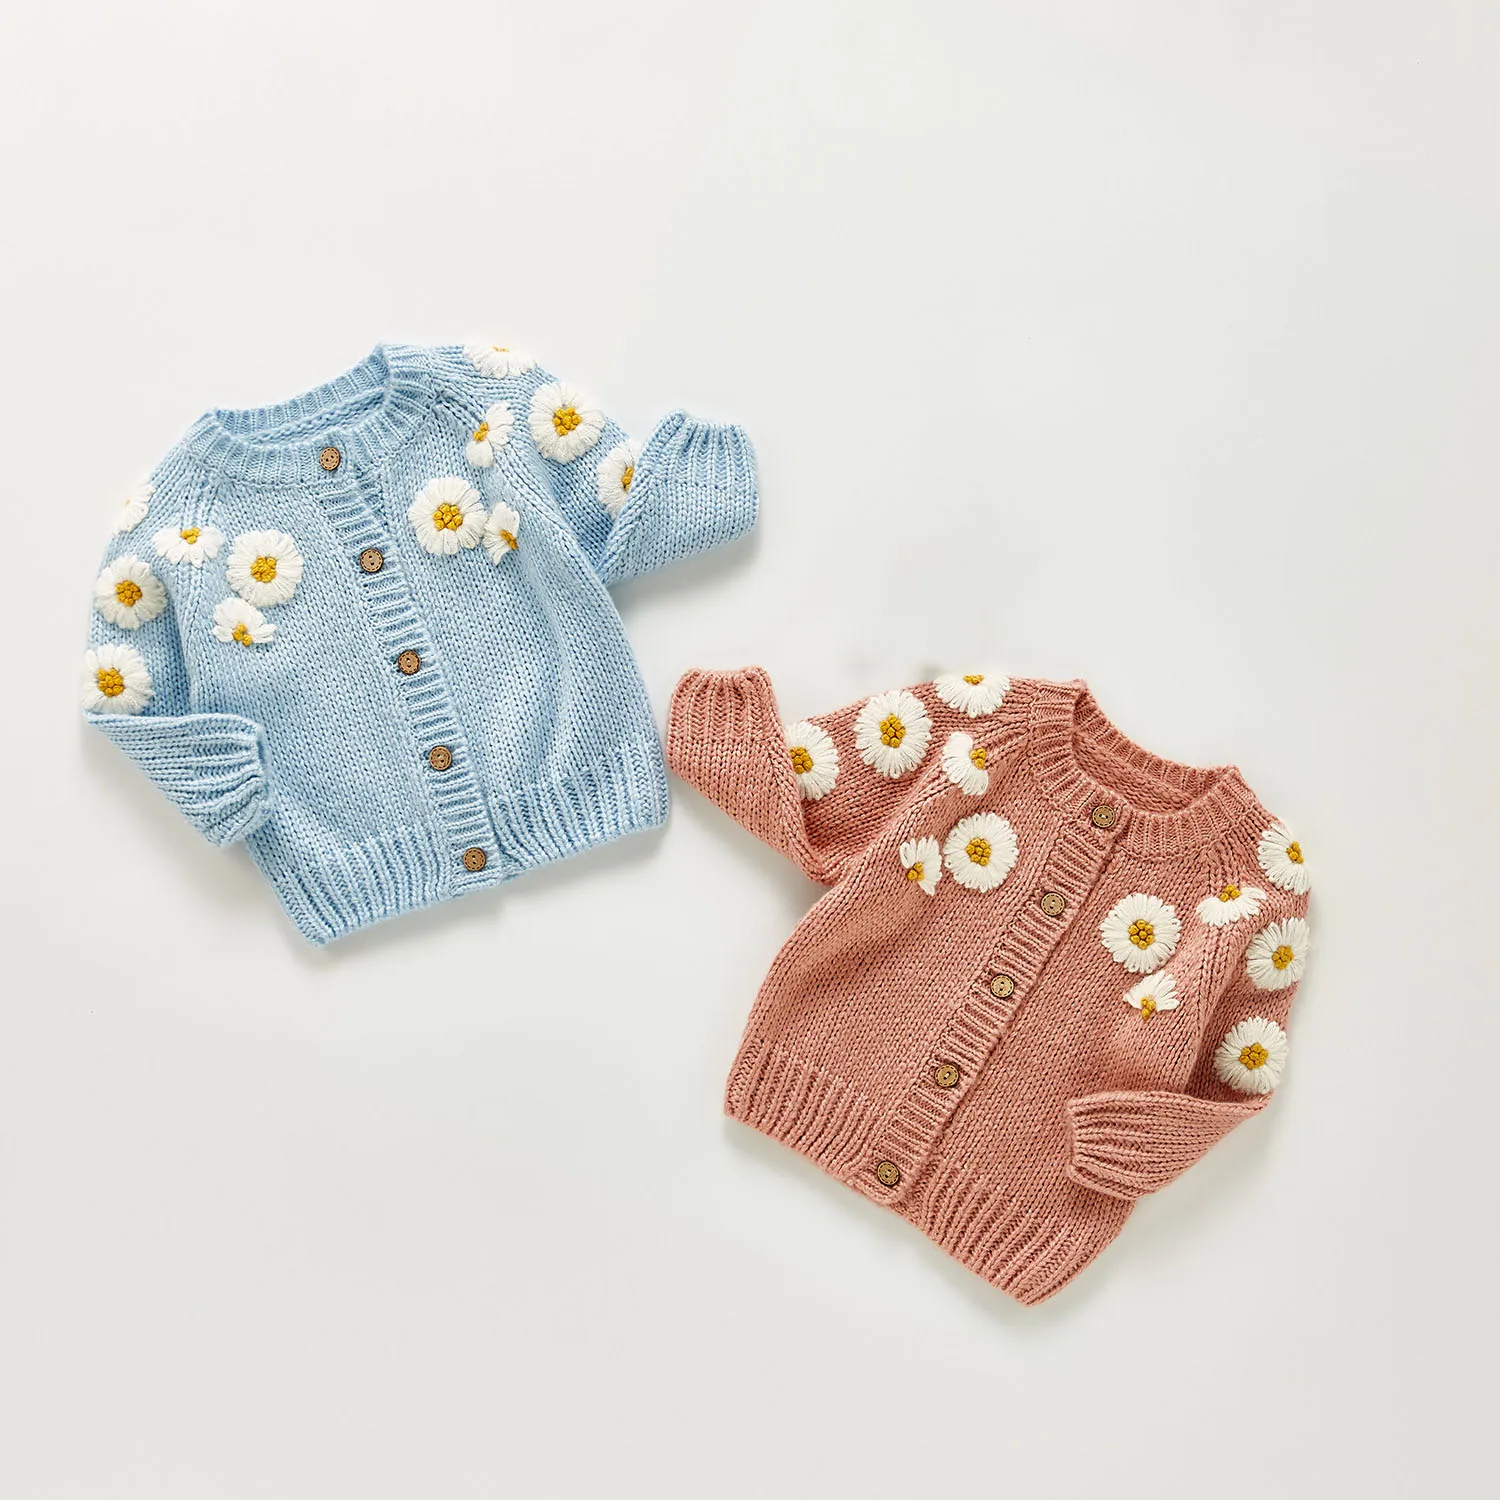 2021 Autumn New Baby Clothes Daisy Embroidery Toddler Girls Sweaters Casual Infant Cardigans Coats